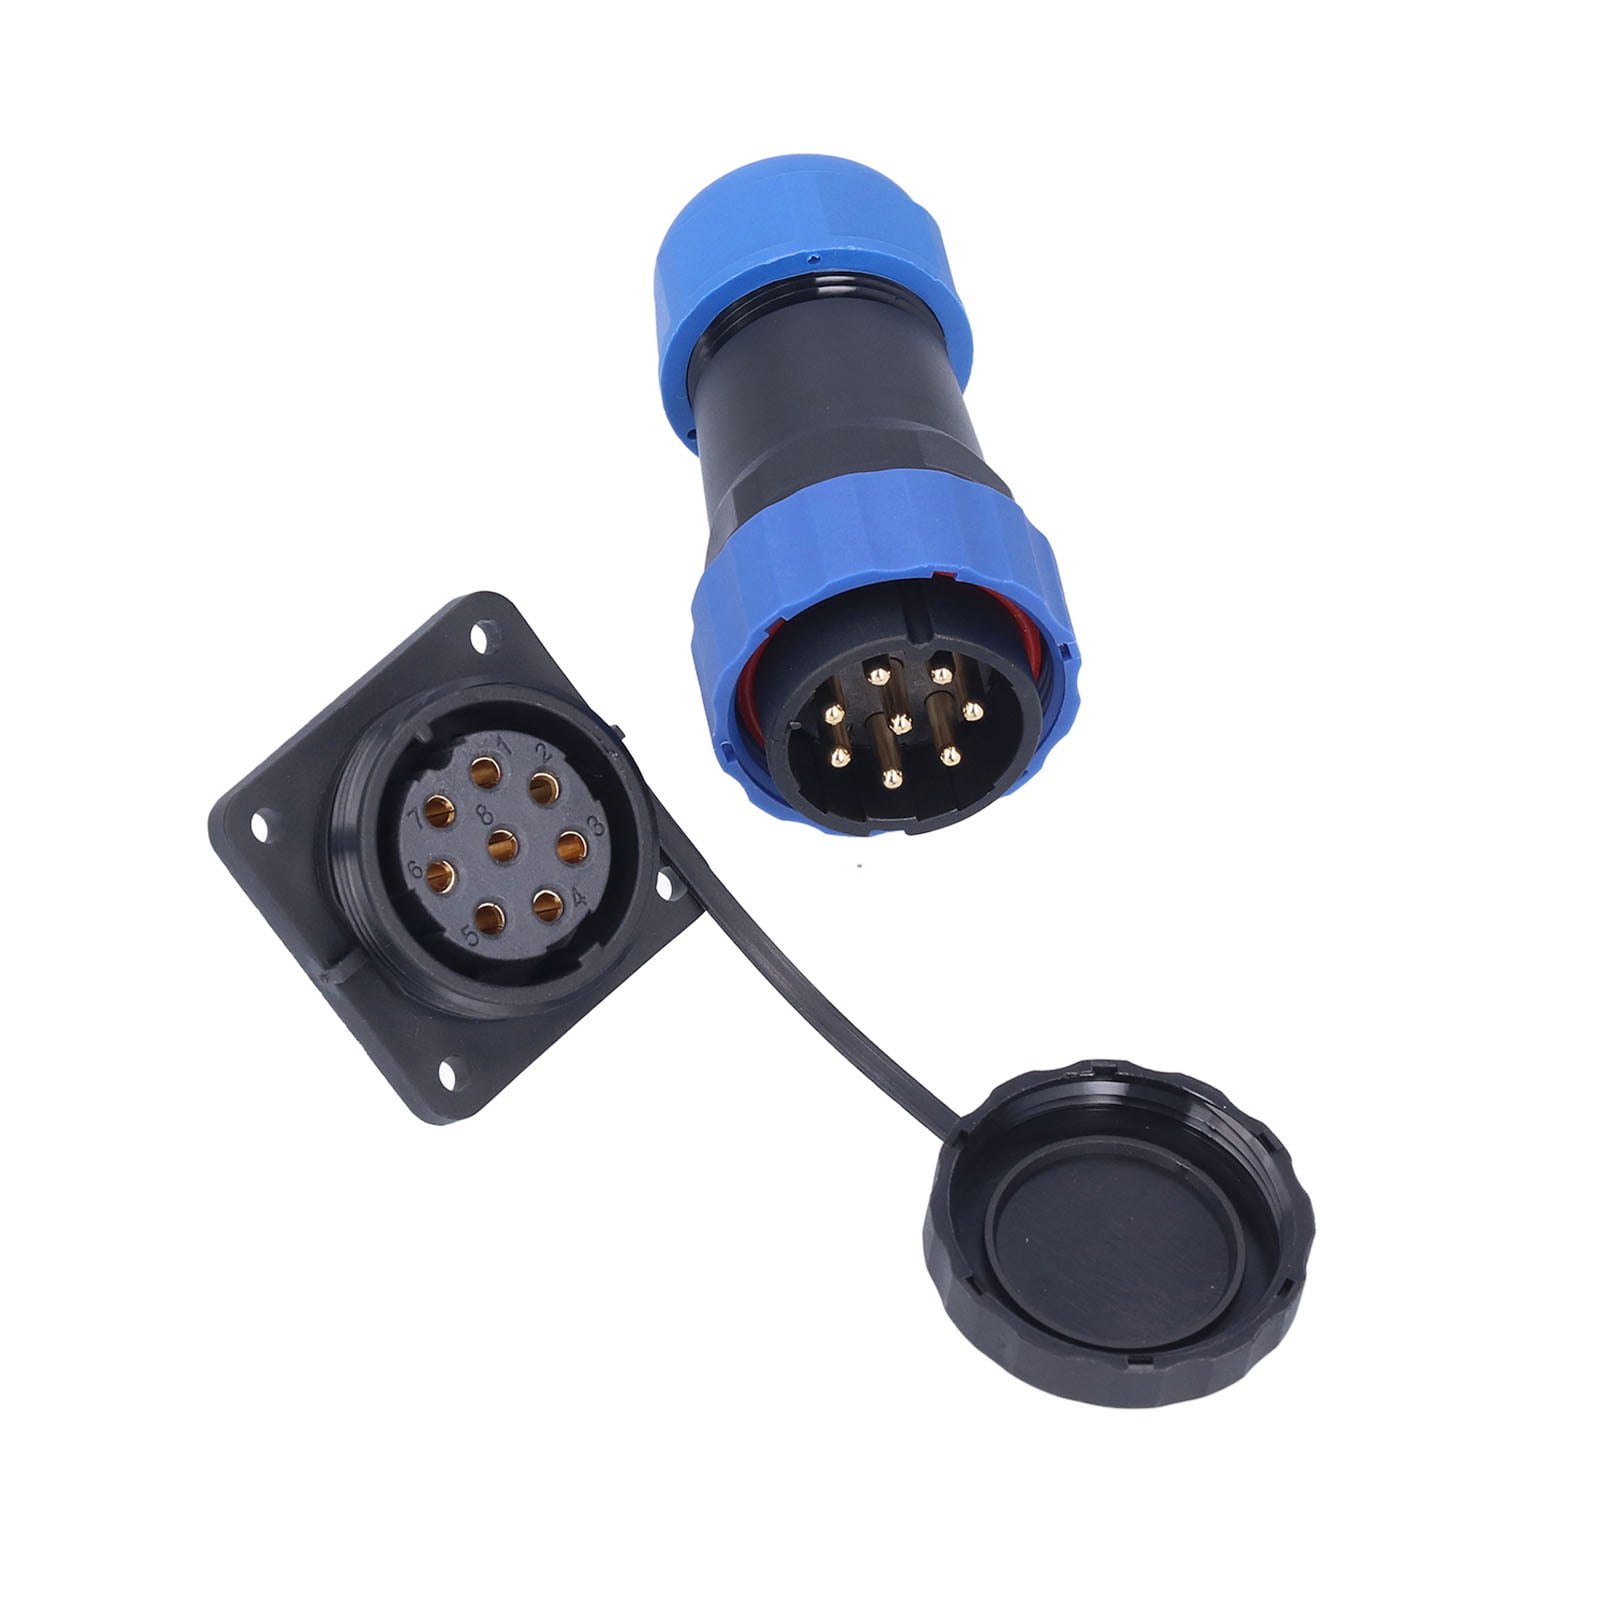 Male Female SP28 Waterproof Connector 3 Pin Plug and Socket ,25A 